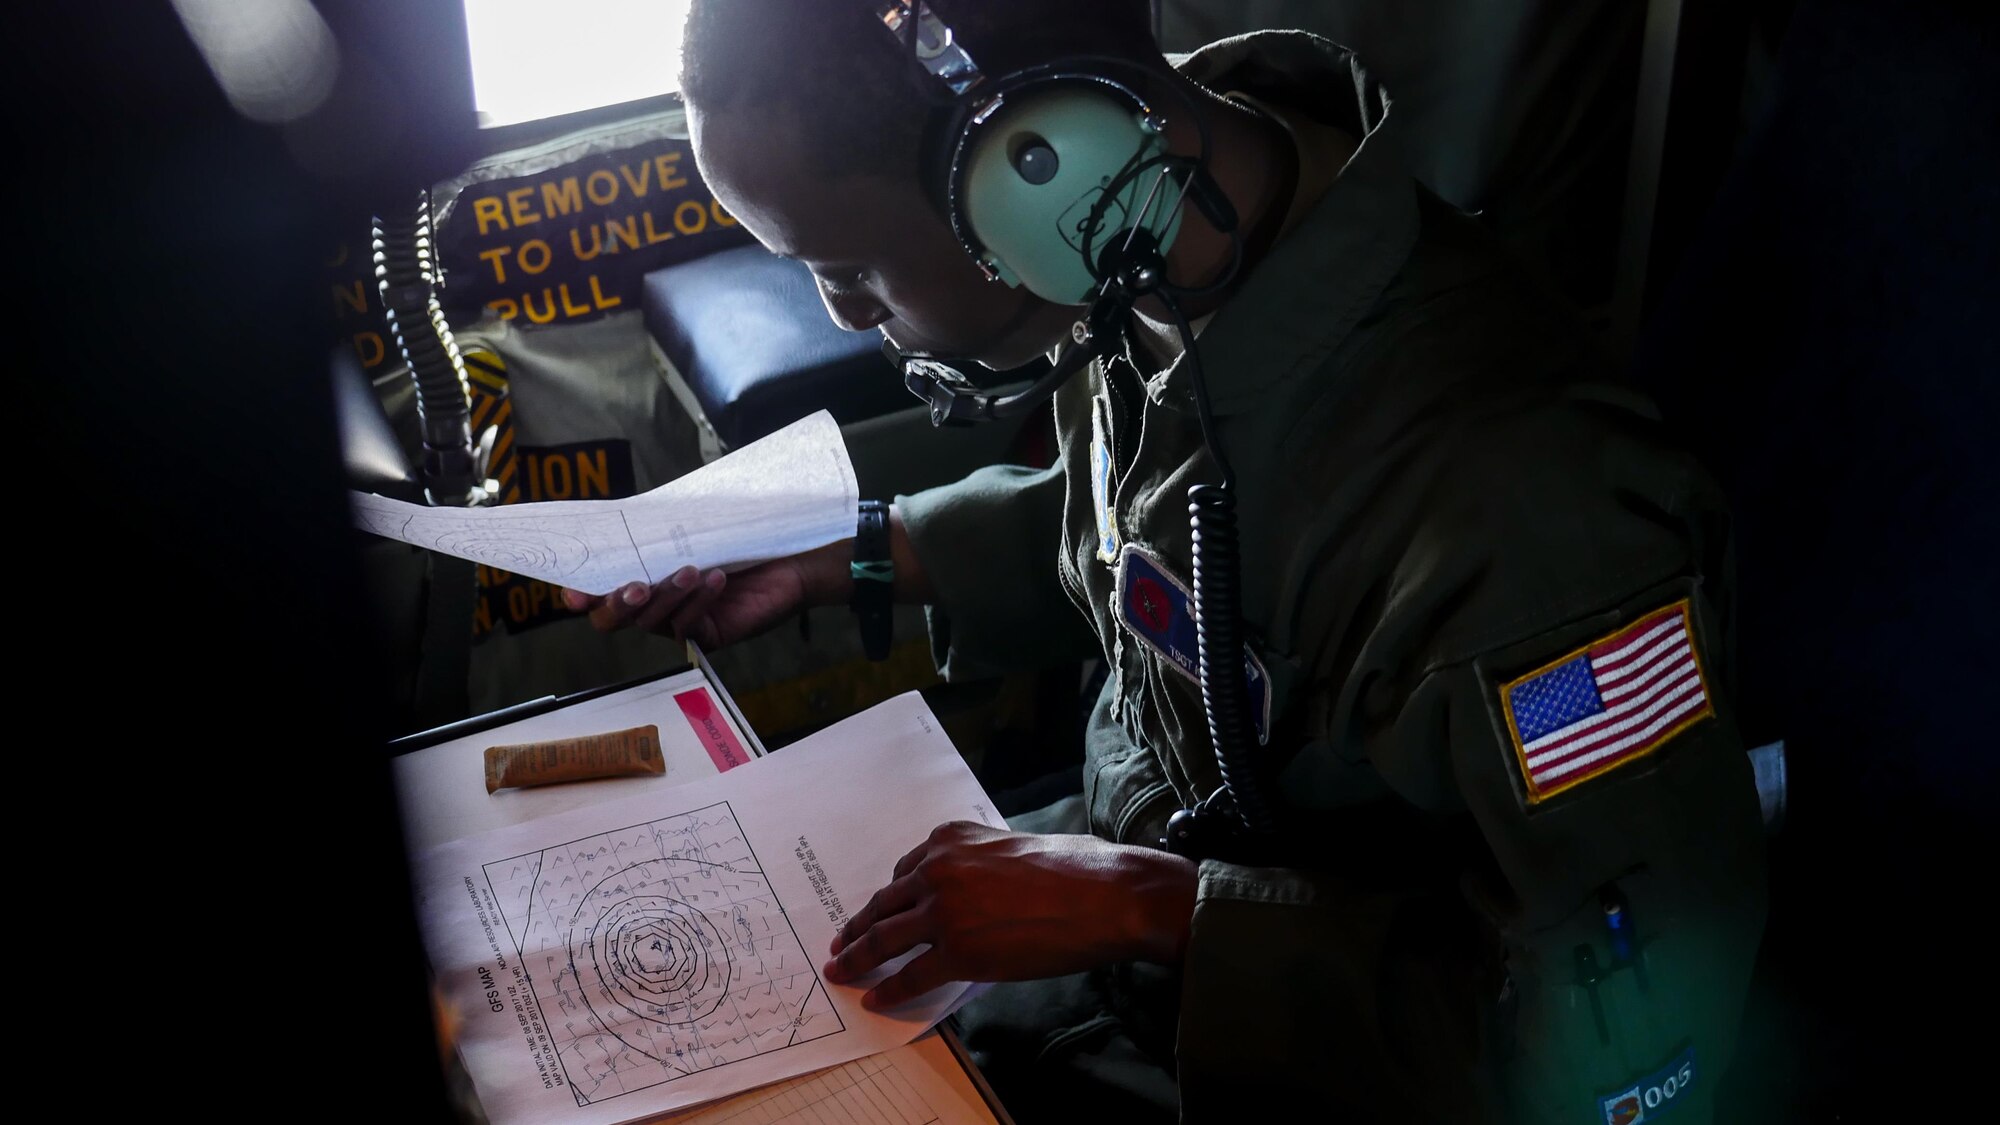 Air Force Reserve Tech. Sgt. Karen Moore, loadmaster, 53rd Weather Reconnaissance Squadron, Keesler Air Force Base, Mississippi, records weather information while flying into Hurricane Irma, Sep. 8, 2017.